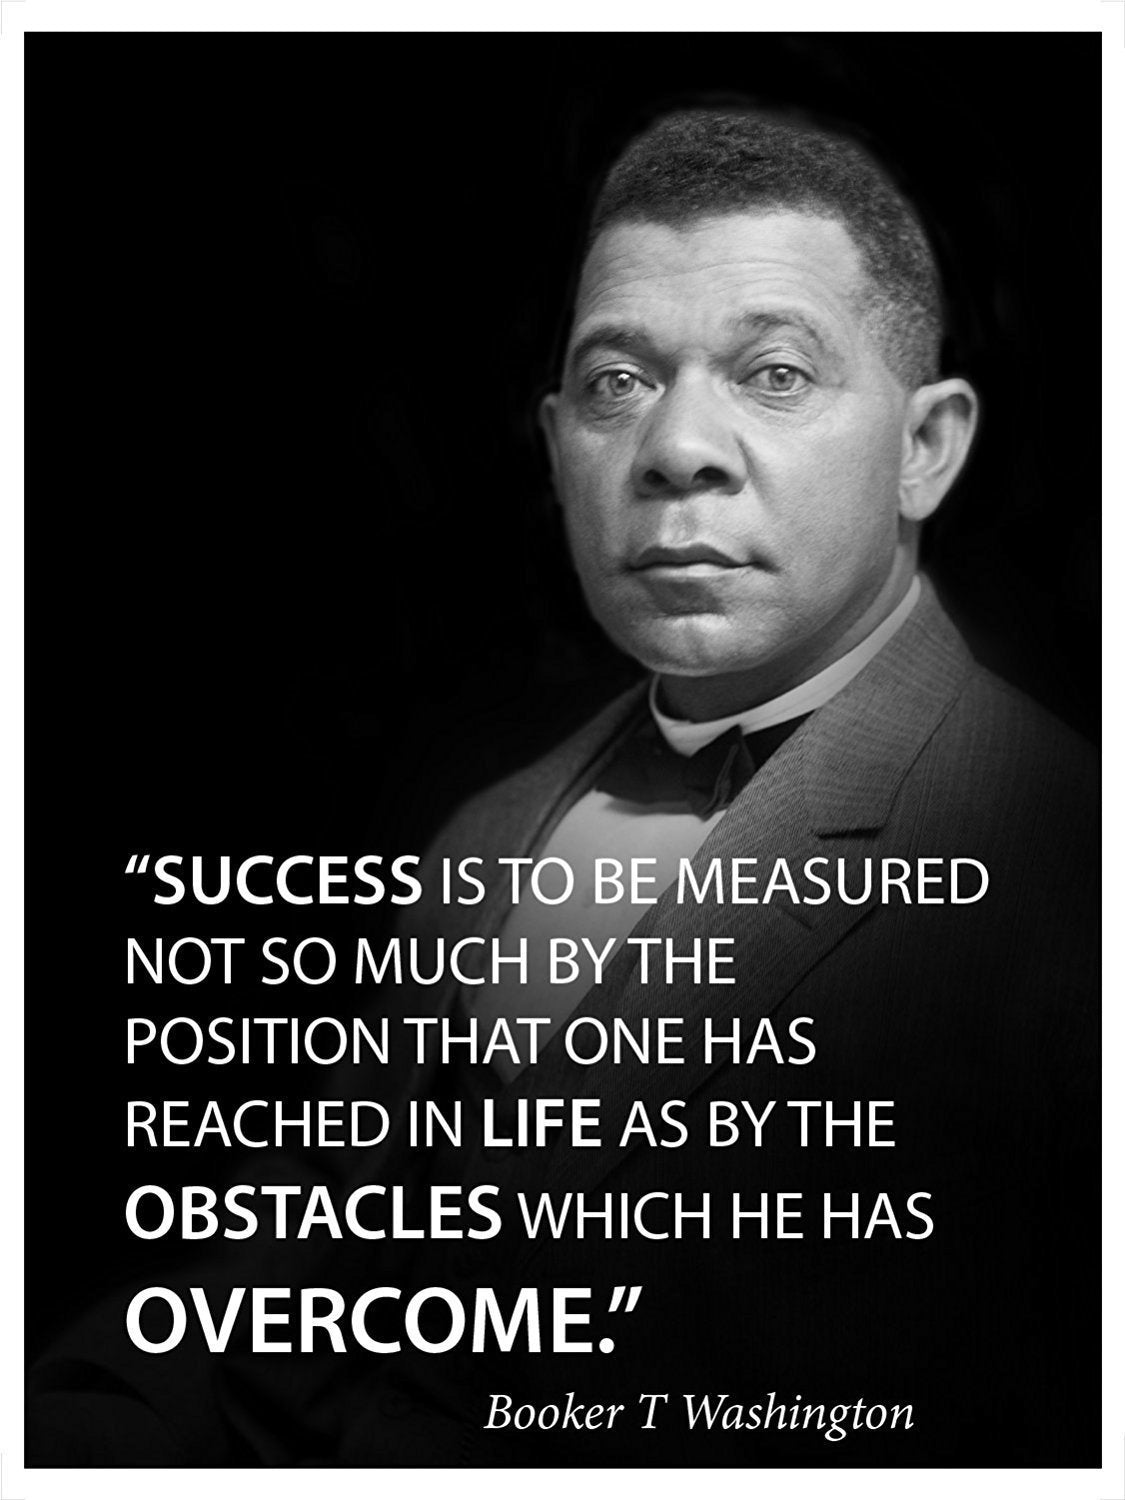 Success is to be measured famous quote poster portrait by Booker T Washington motivational decoration for school classrooms libraries study halls educators - Young N' Refined